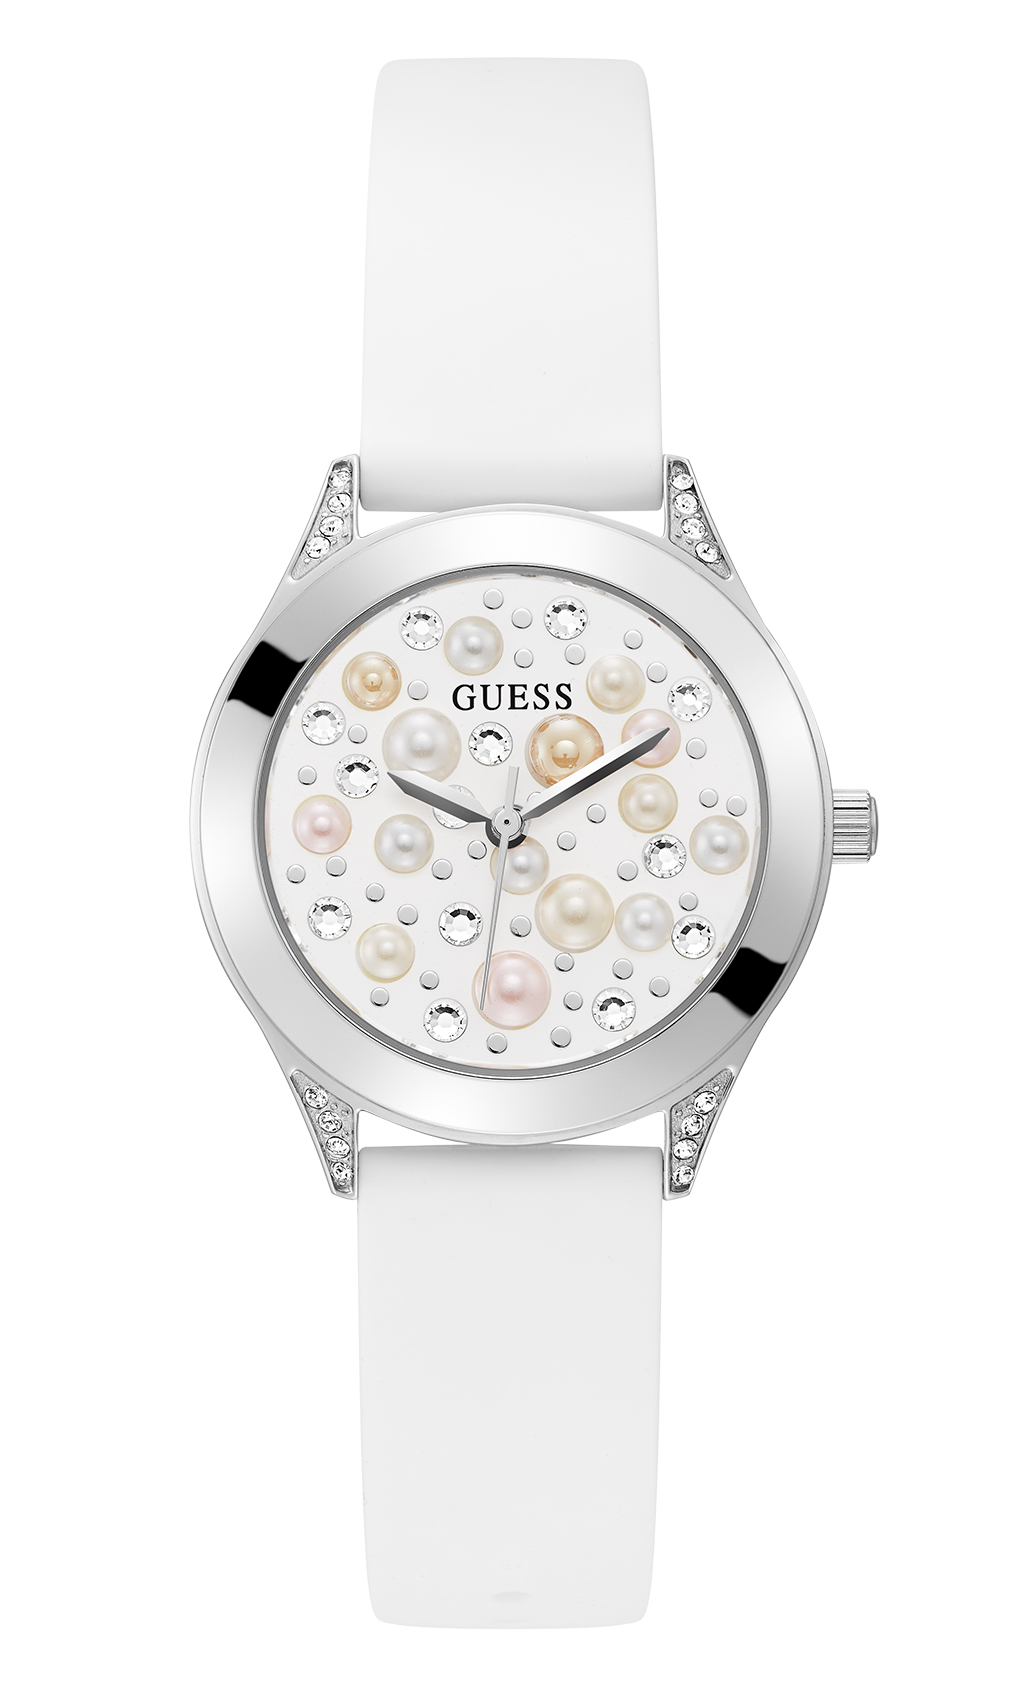 GUESS PEARL lifestyle